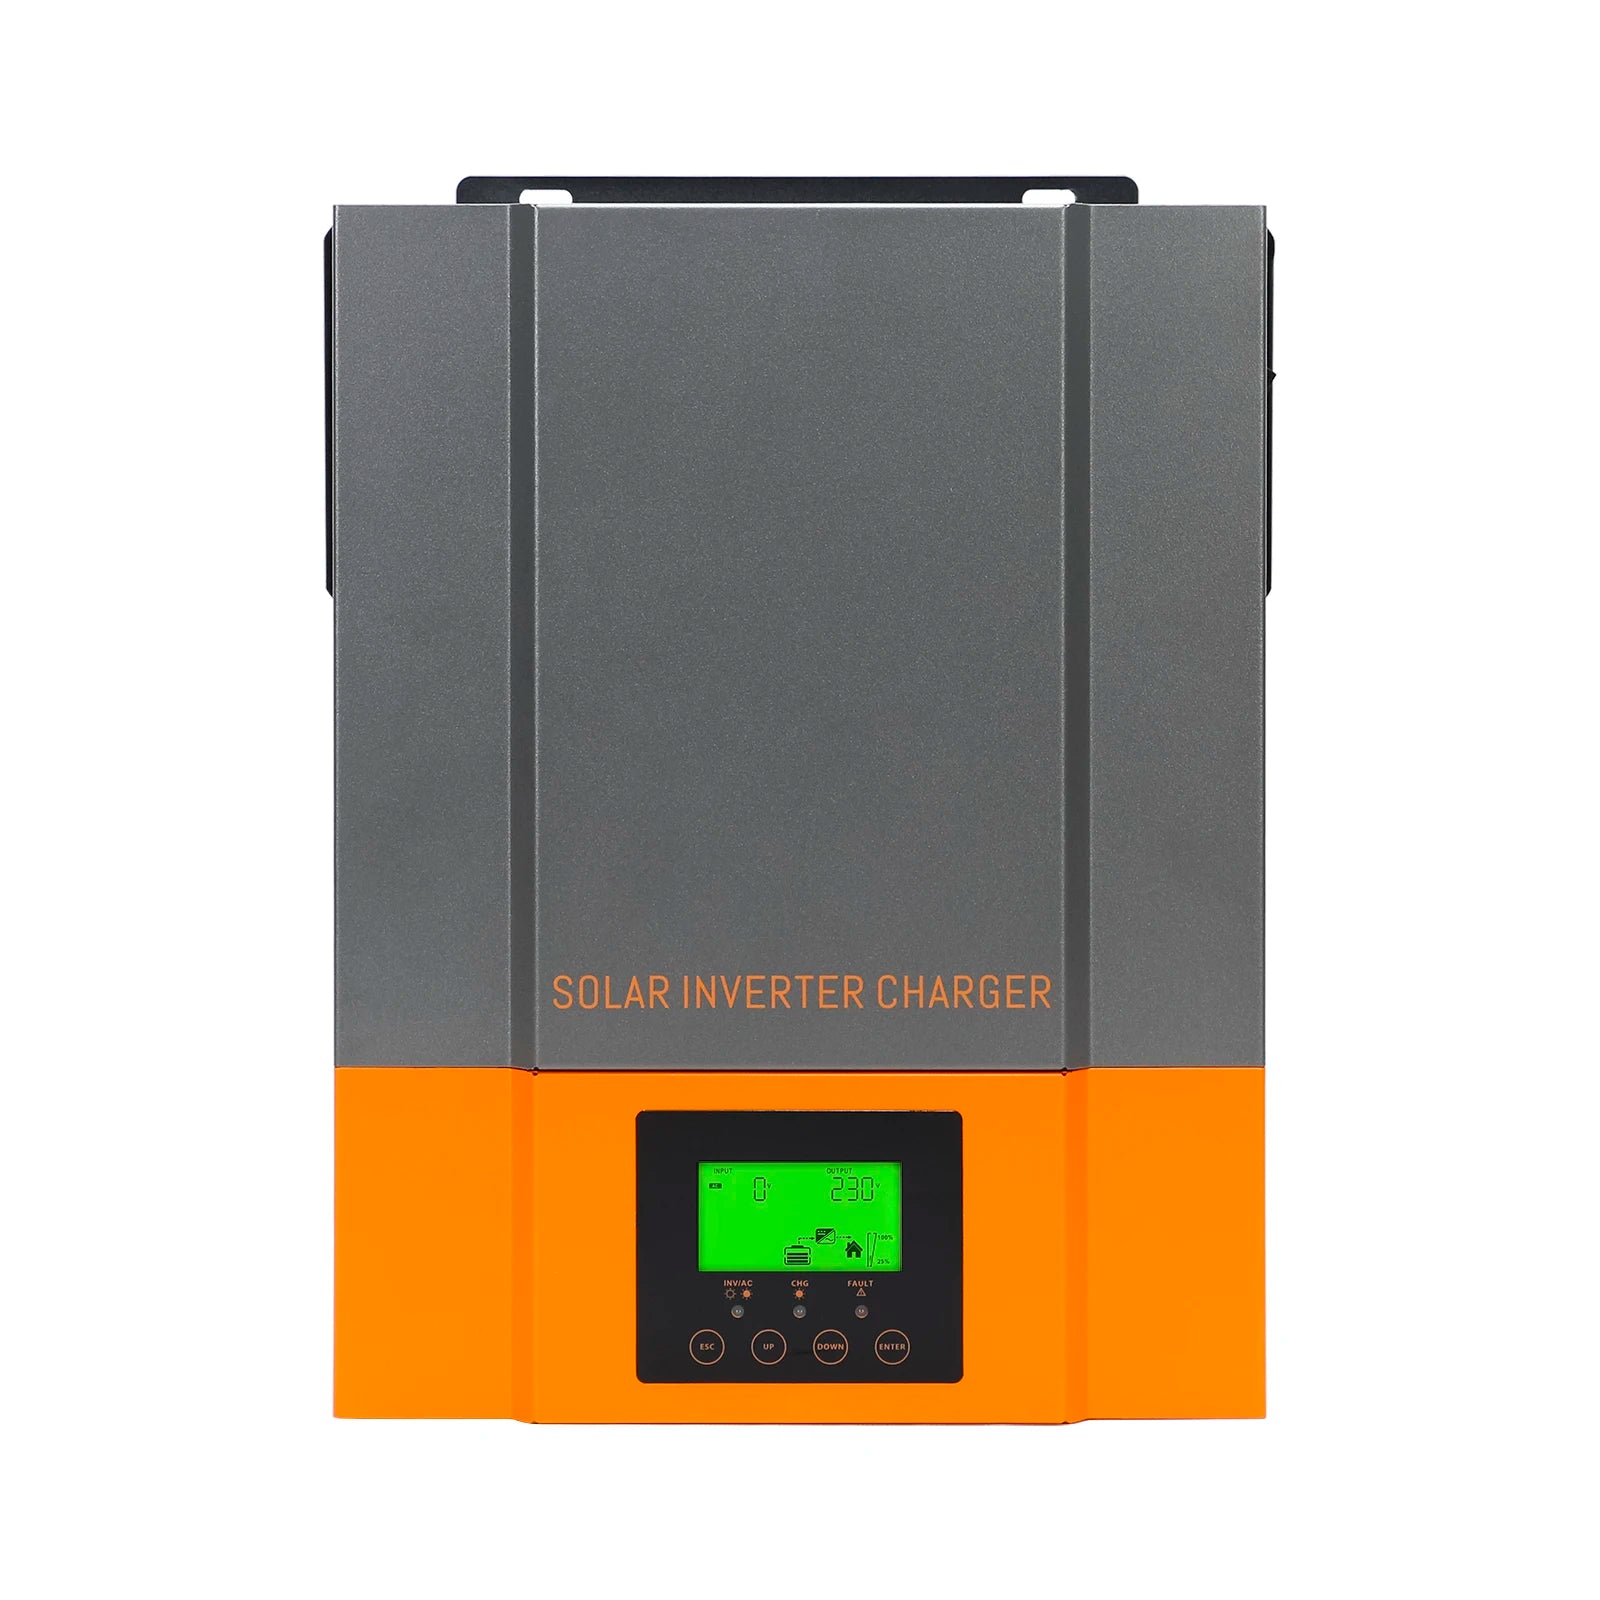 Advanced solar inverter charger with high power output, Wi-Fi connectivity, and AC charging capabilities.